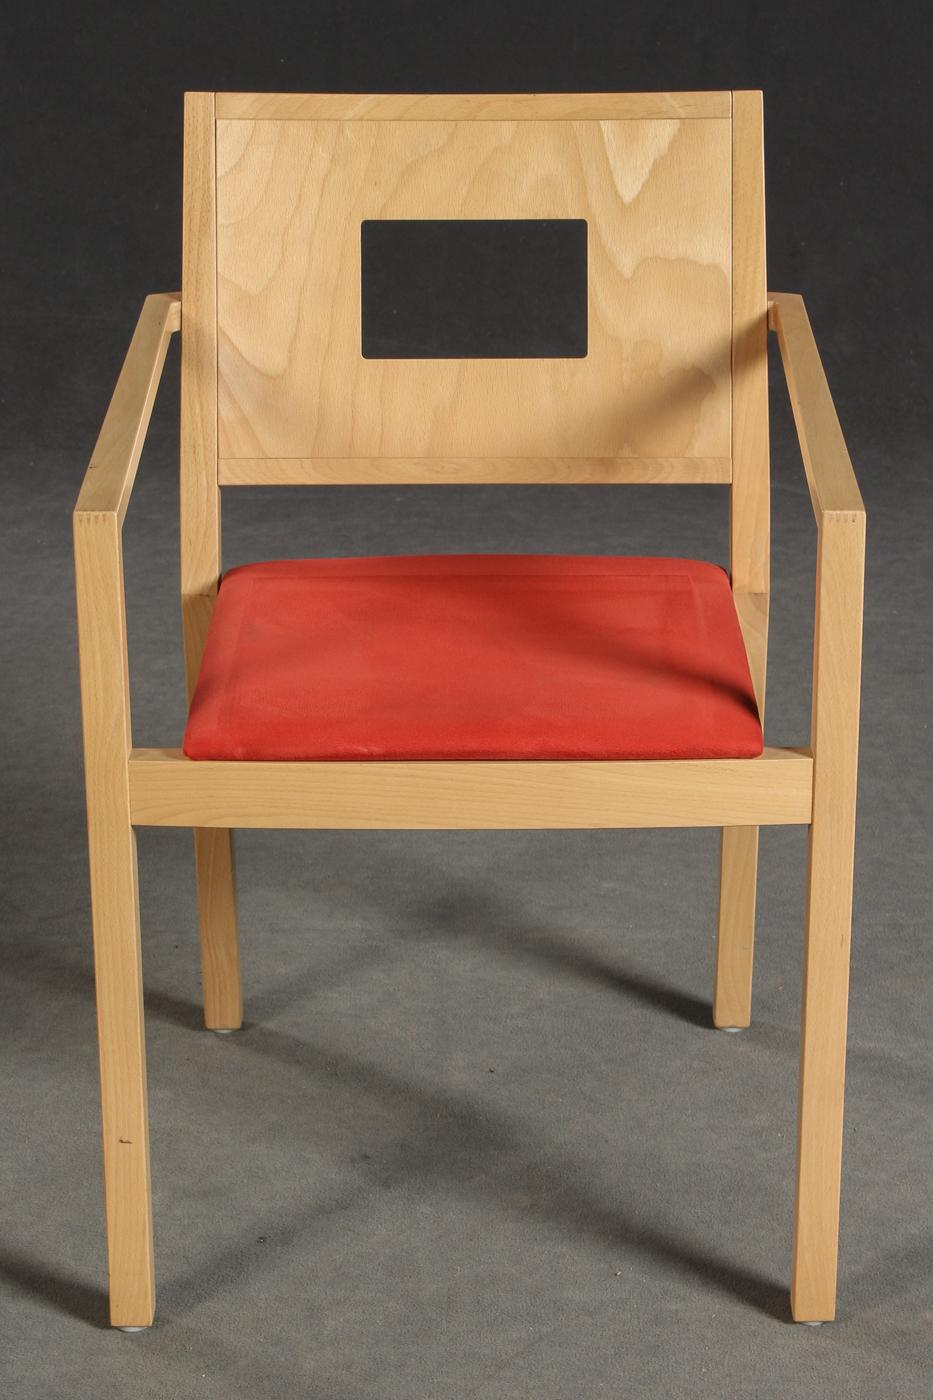 Pair of upholstered stacking chairs by Brunner.
Laminated beech wood frame, with armrests. Various upholstery fabrics, one in red, one in black.